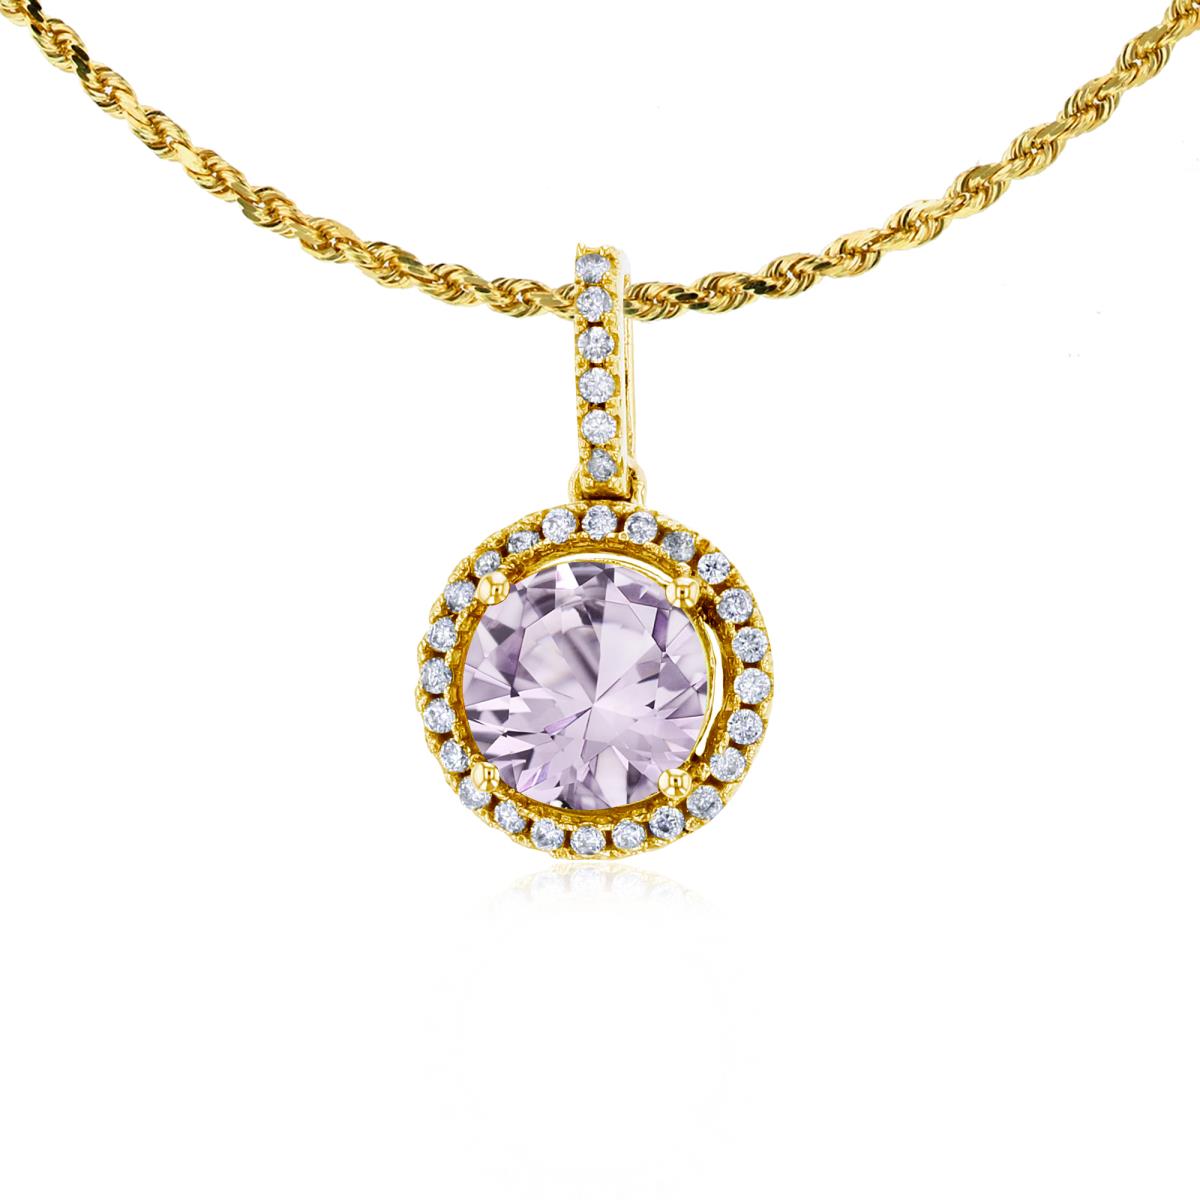 10K Yellow Gold 7mm Round Rose De France & 0.15 CTTW Round Diamonds Halo 18" Rope Chain Necklace